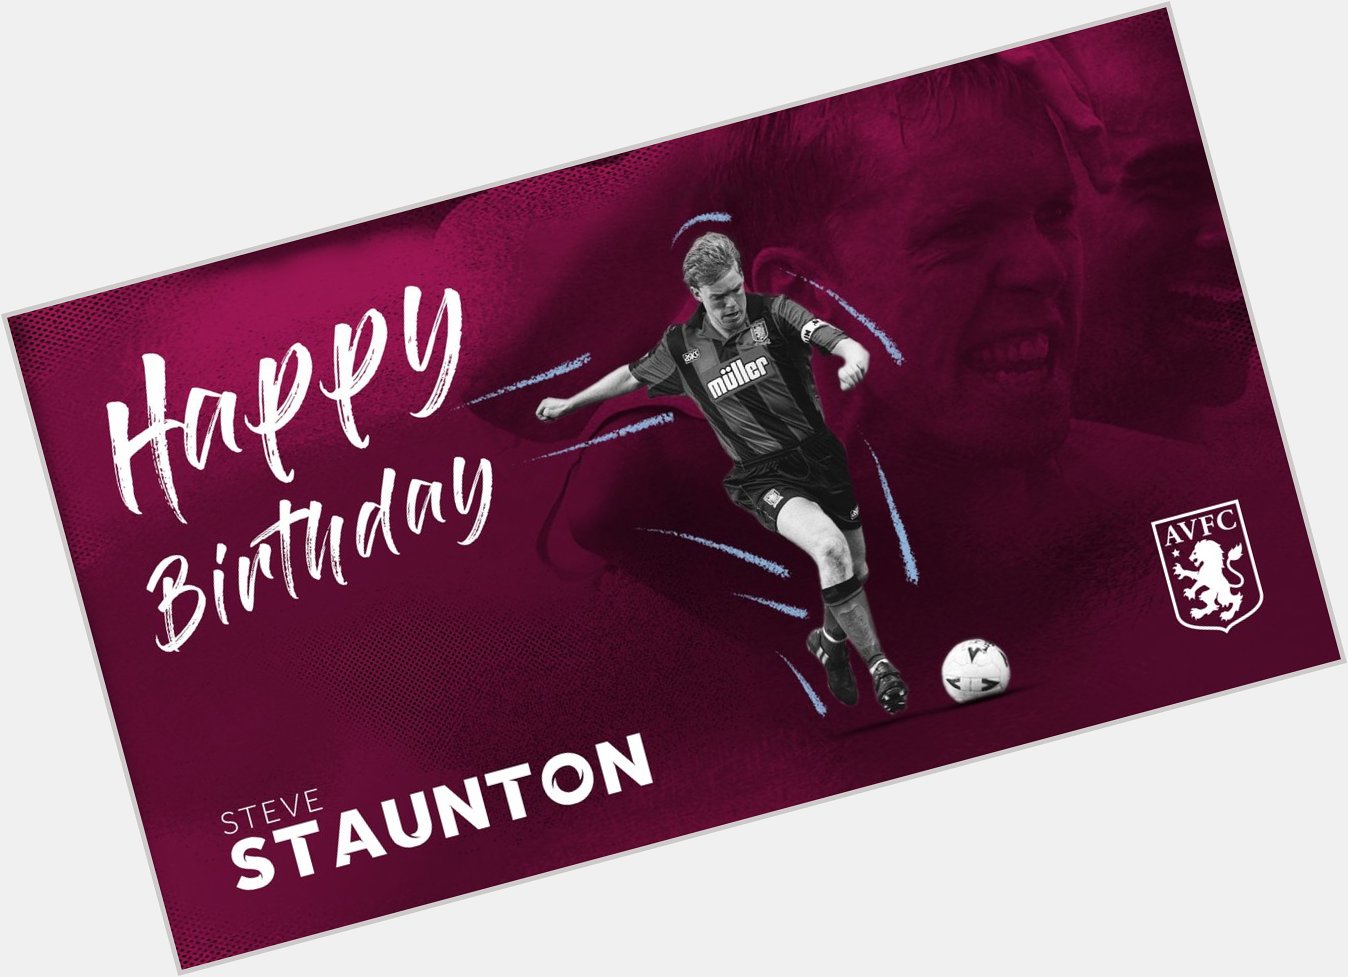  1994 League Cup 1996 League Cup

Happy birthday to our former defender, Steve Staunton!  